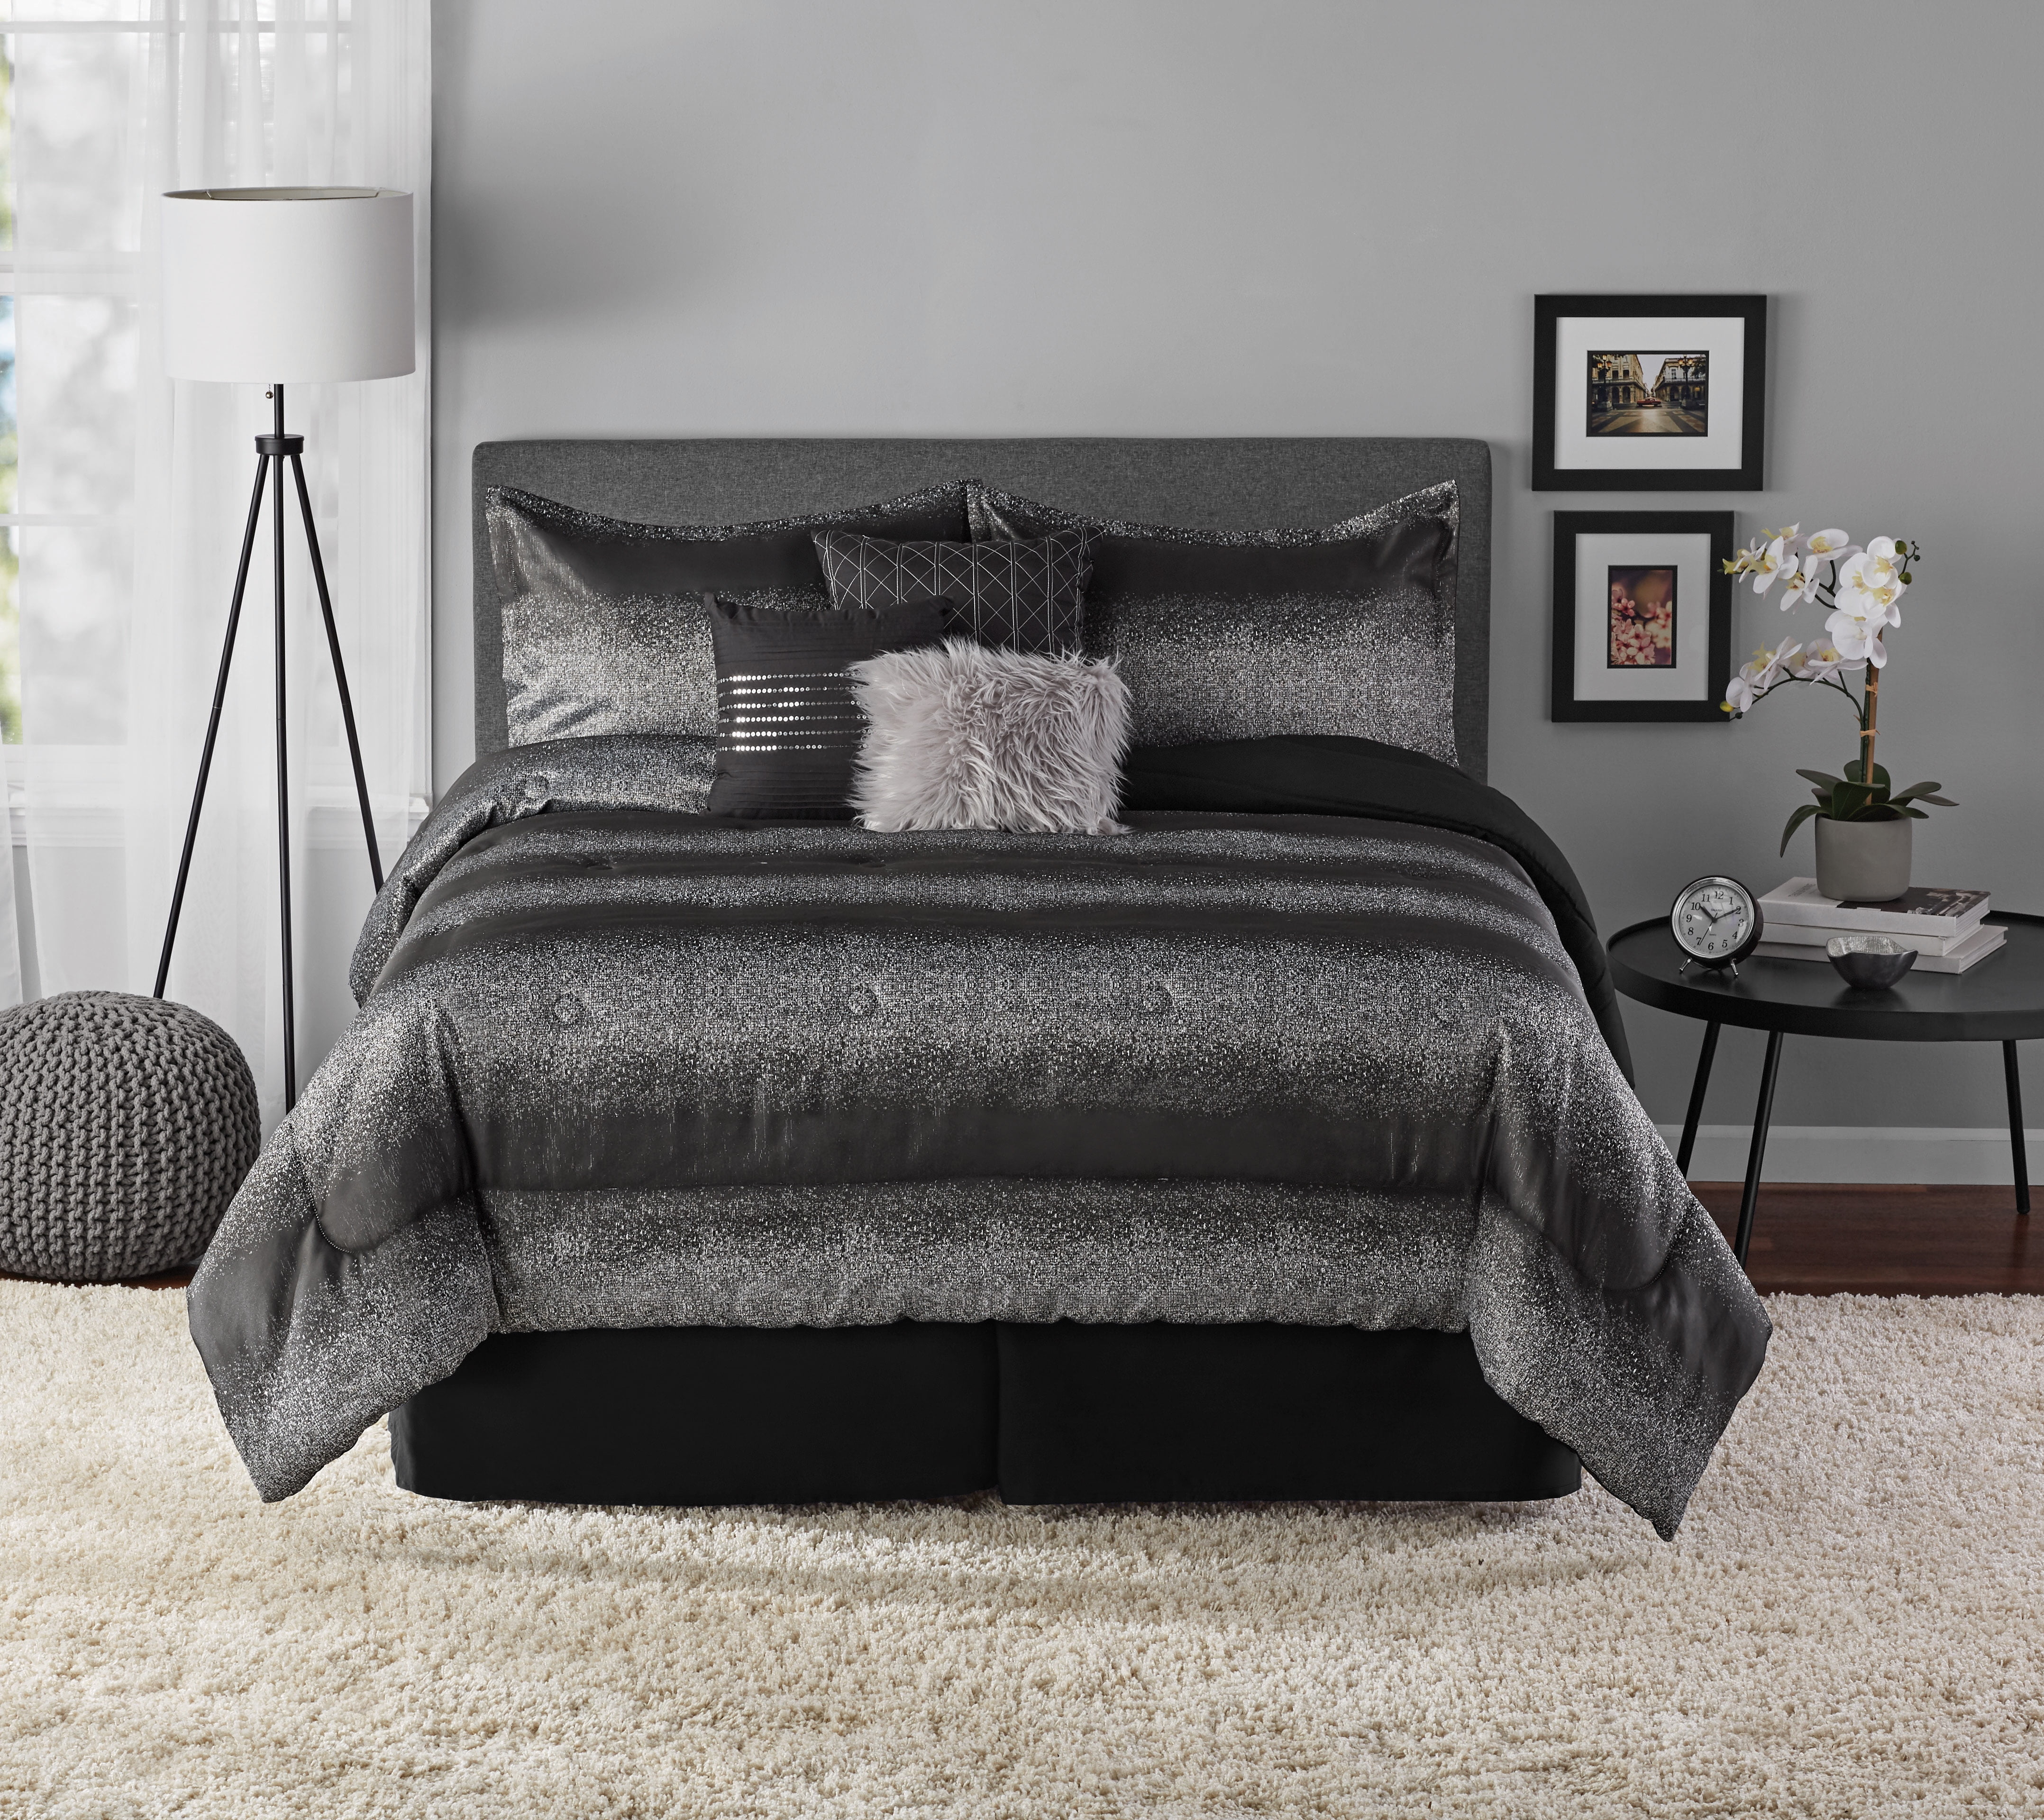 7 Piece Over Size Jacquard Comforter set Black Gold Queen Size New at Linen Plus 